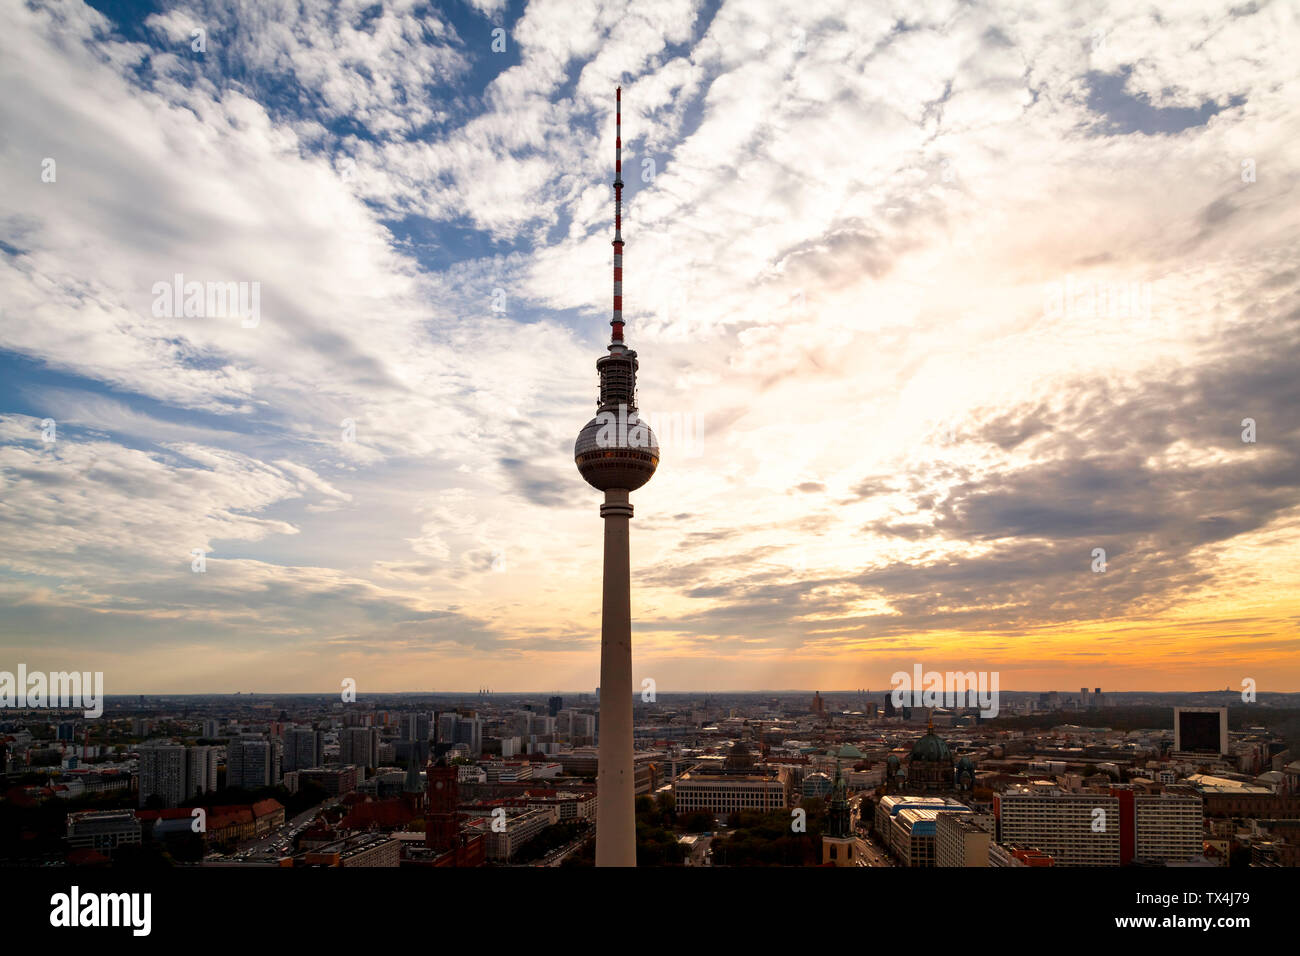 Germany, Berlin, television tower at twilight Stock Photo